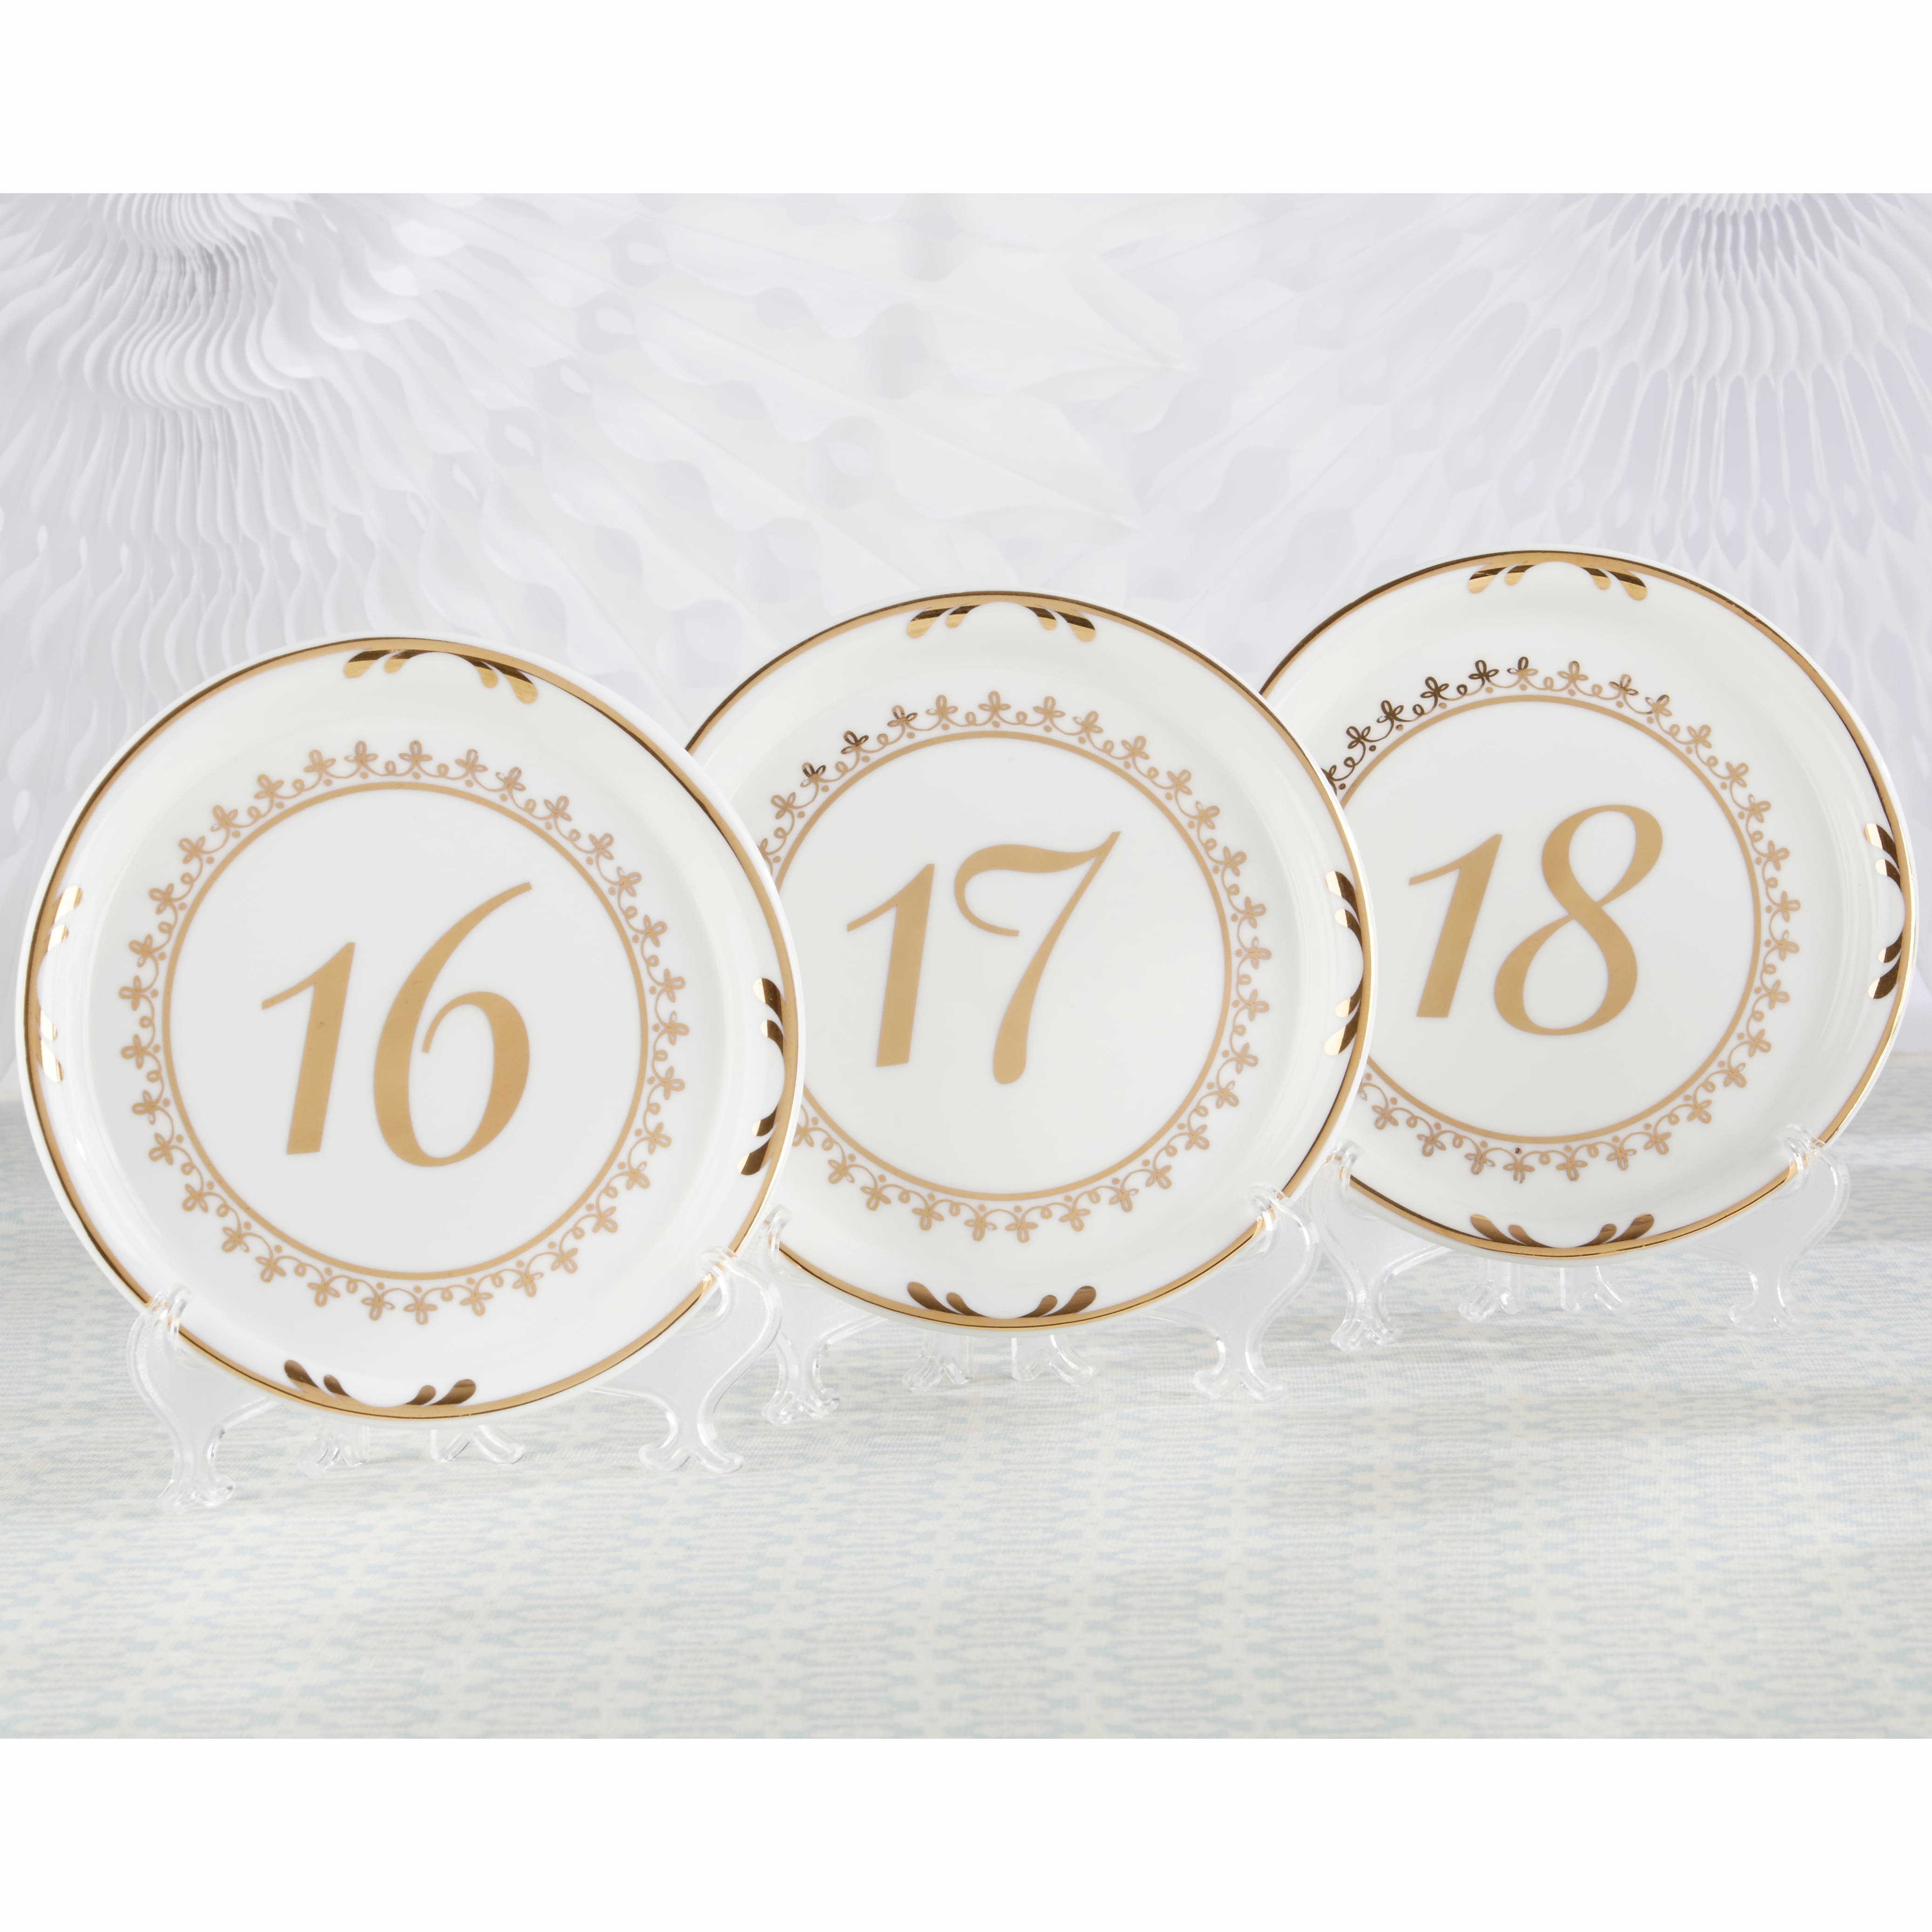 kate aspen tea time vintage plate table numbers 13 to 18